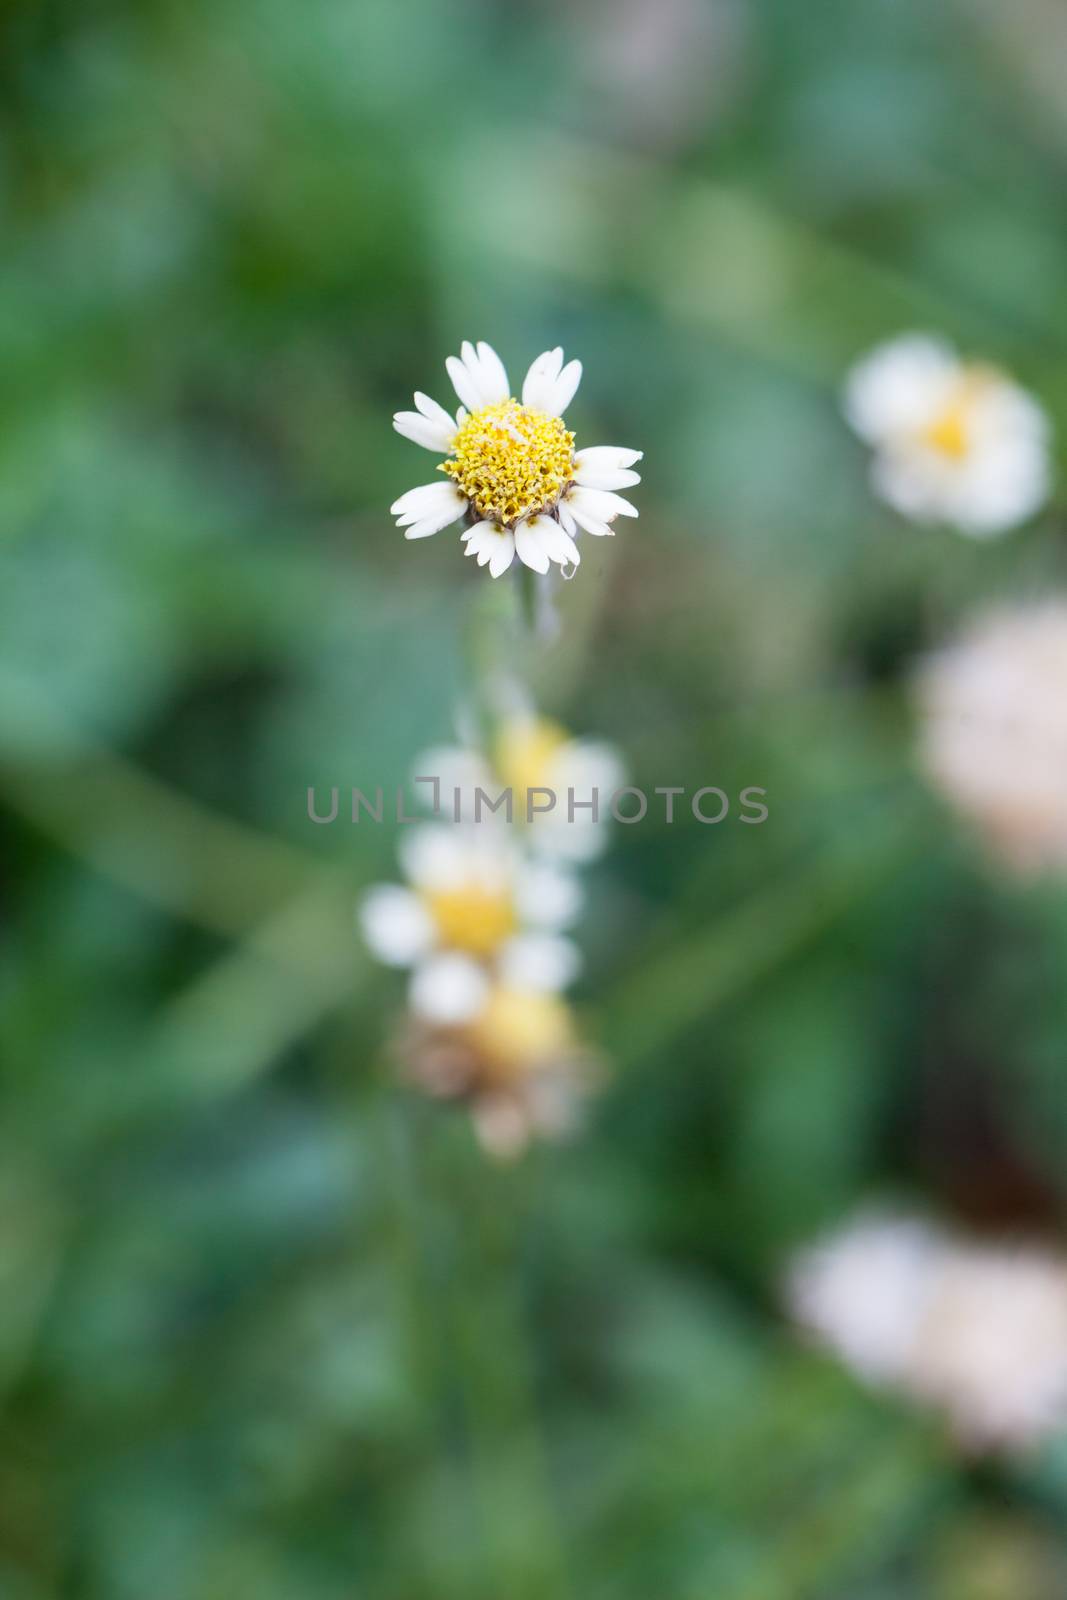 Little White Flower by a454